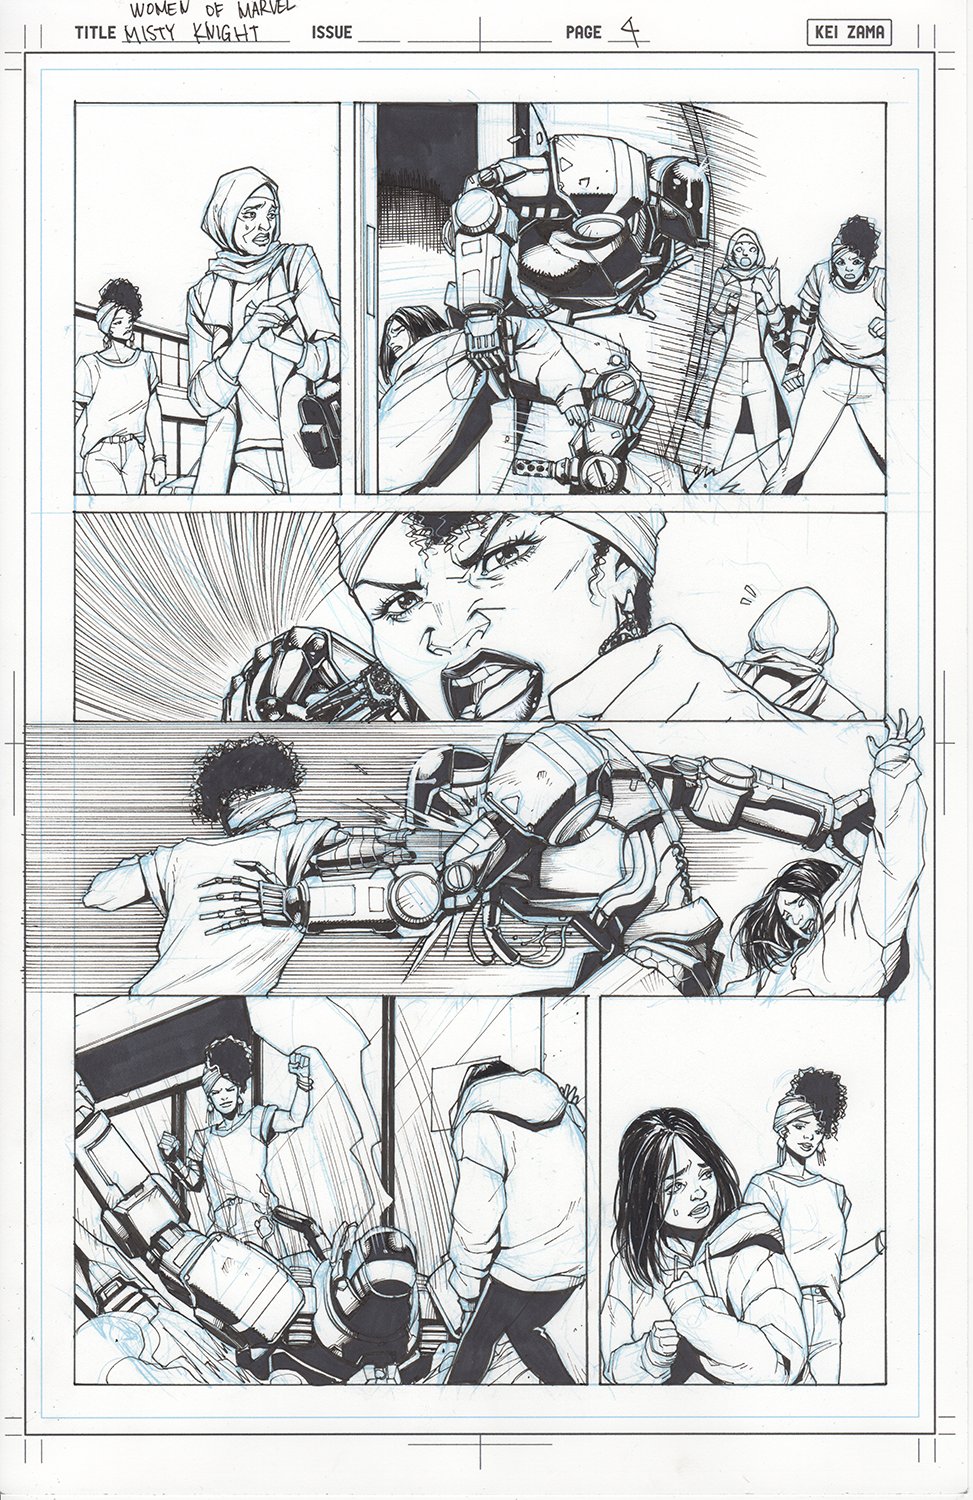 Women Of Marvel #1 Page04